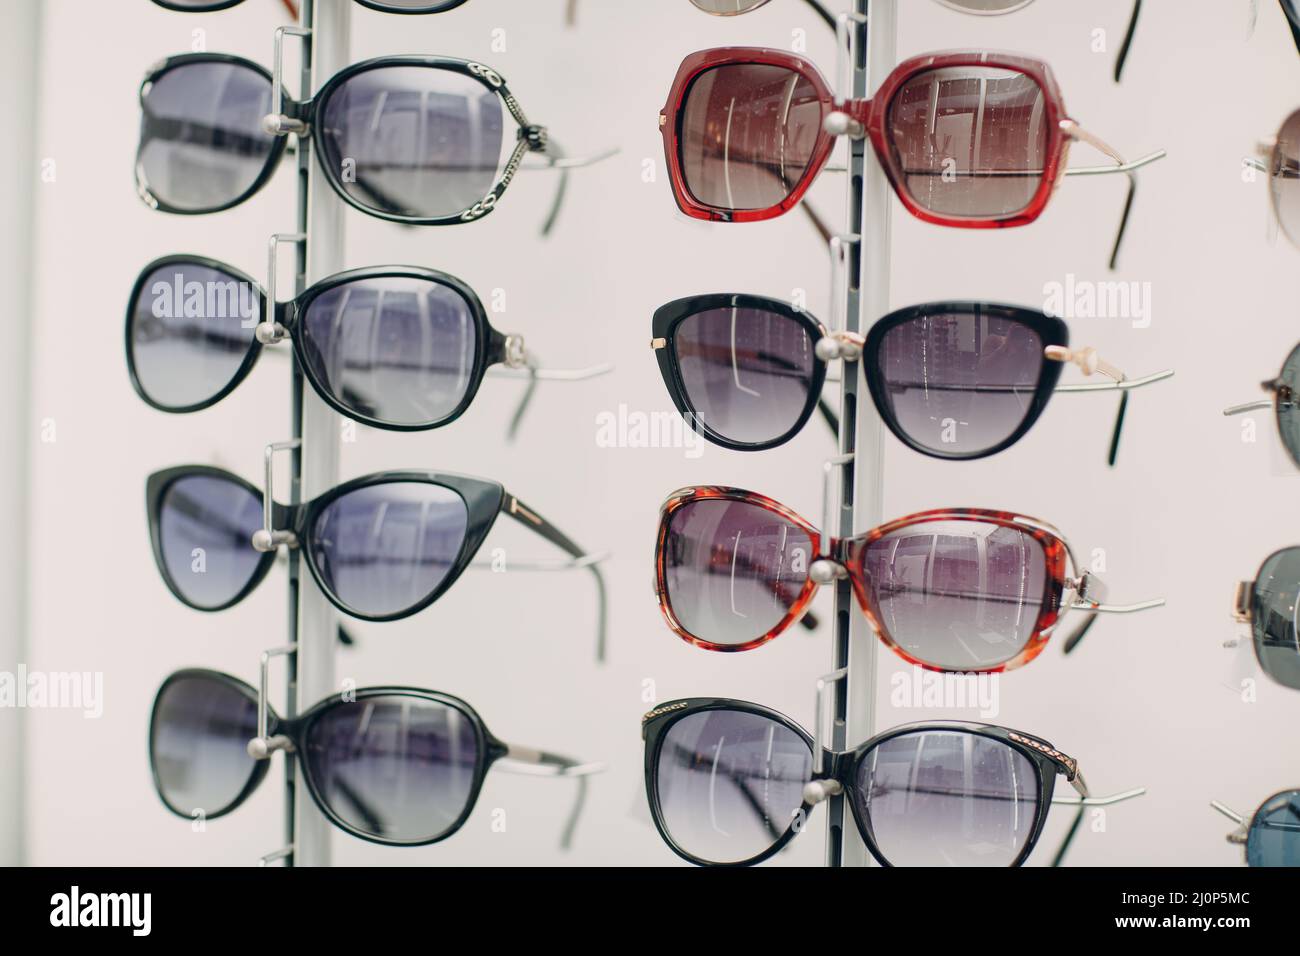 Glasses on the counter in the optics store. Eyeglasses goggles sunglasses on shop. Stock Photo